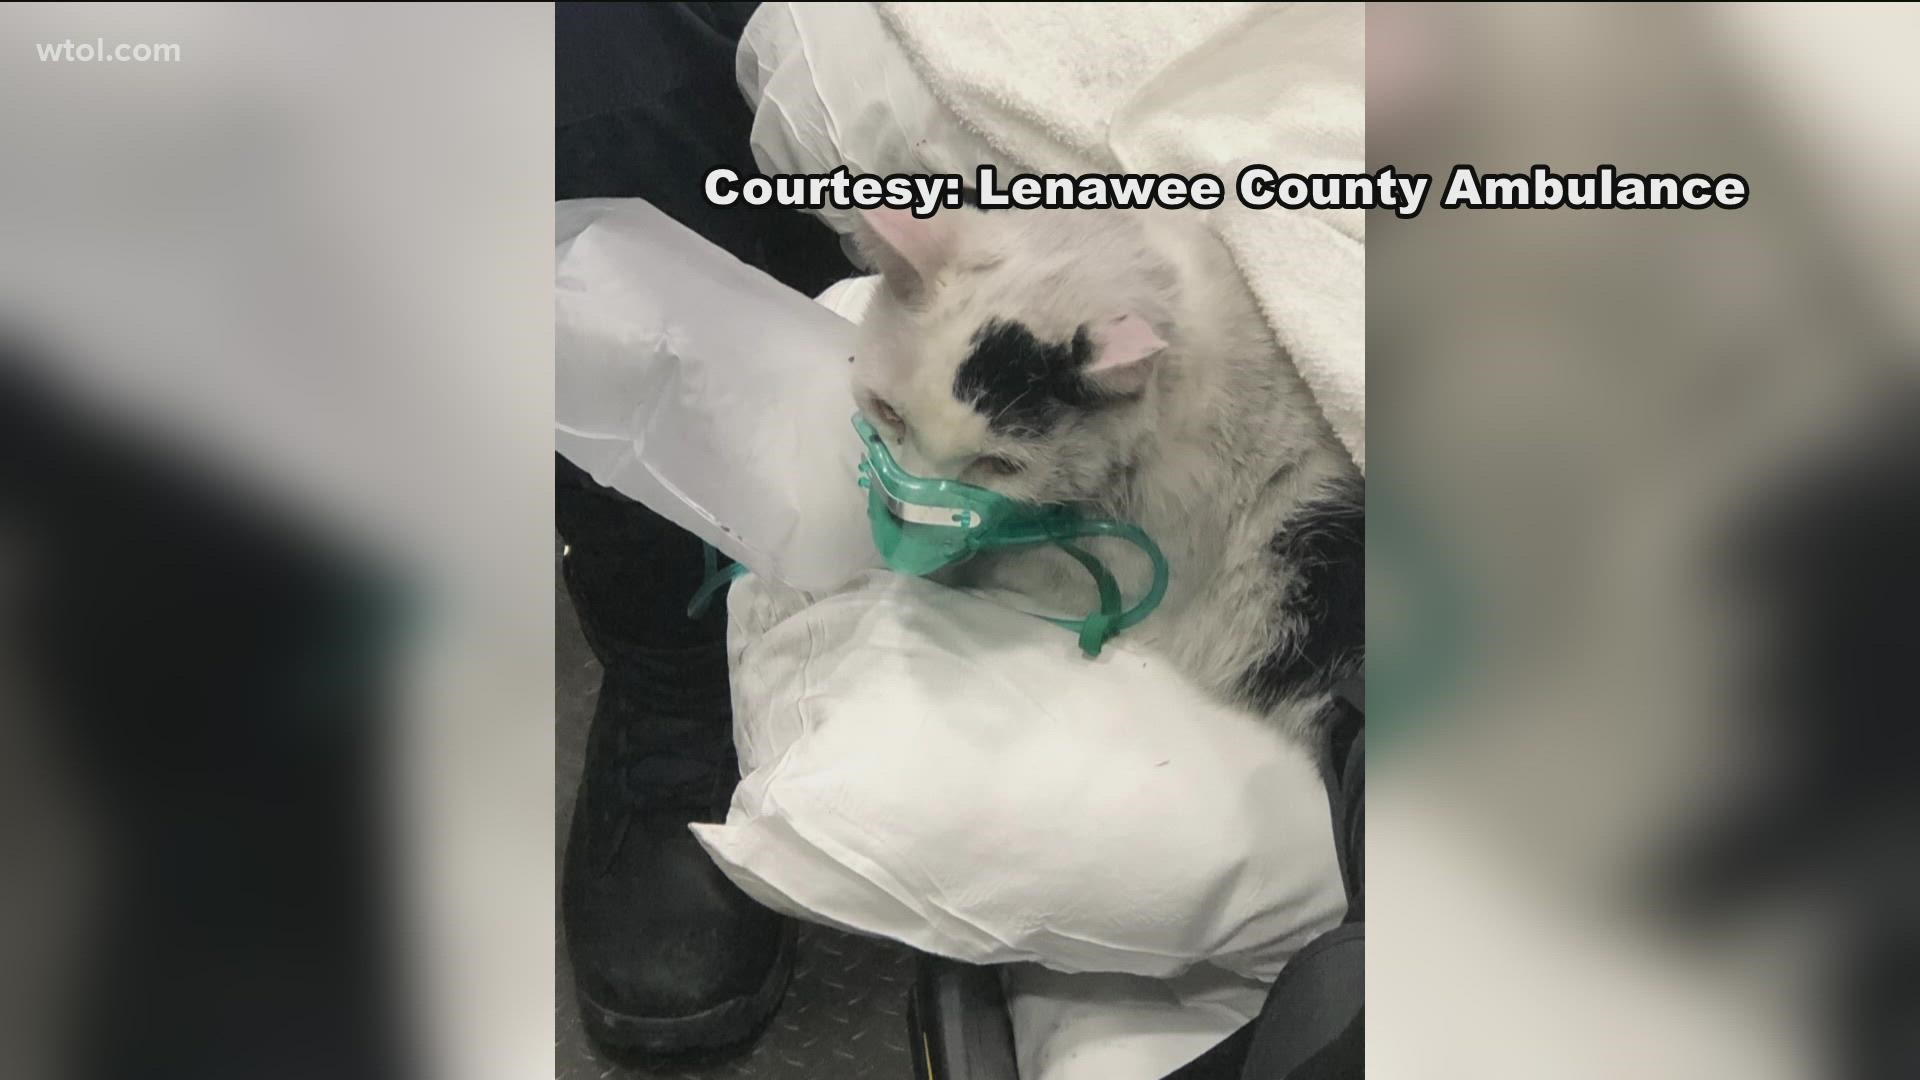 Paramedics were able to save revive a Lenawee County cat, Hope, after a fire on Thursday. A dog was also revived after a south Toledo fire that same day.